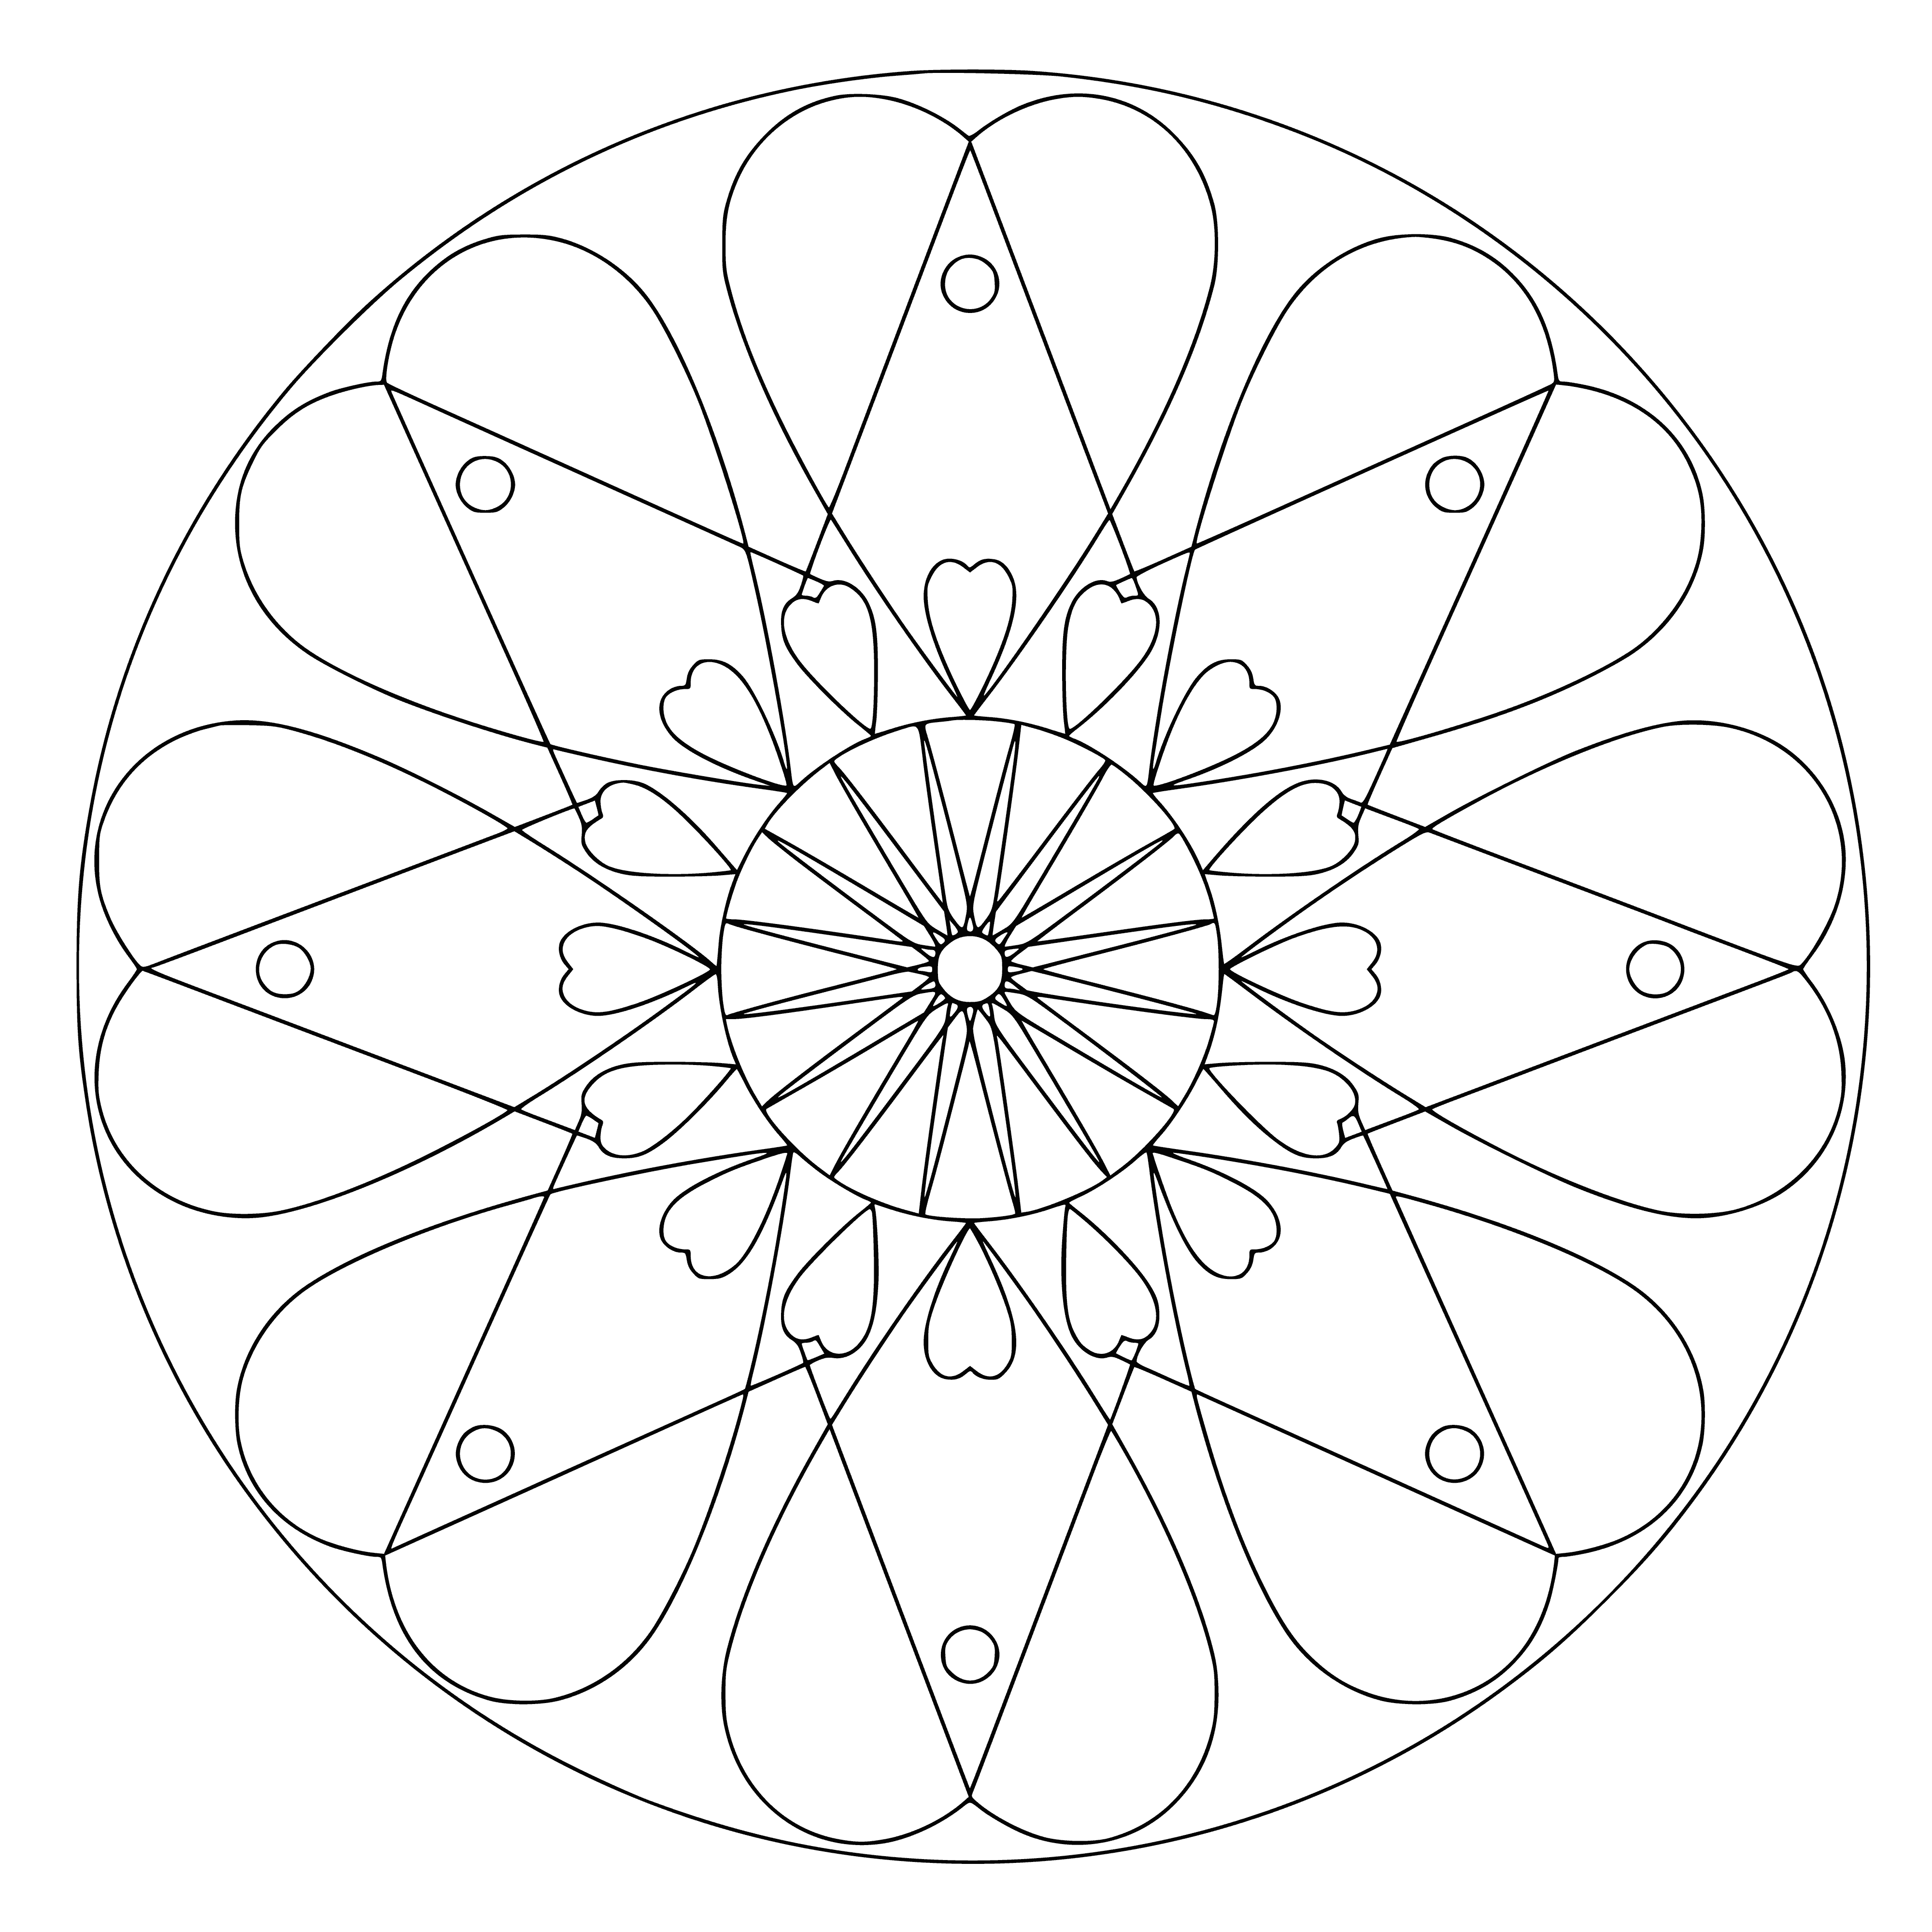 coloring page: Coloring mandalas can be a calming activity, promoting relaxation & aiding meditation; representing the universe & colors associated with different aspects of the self.